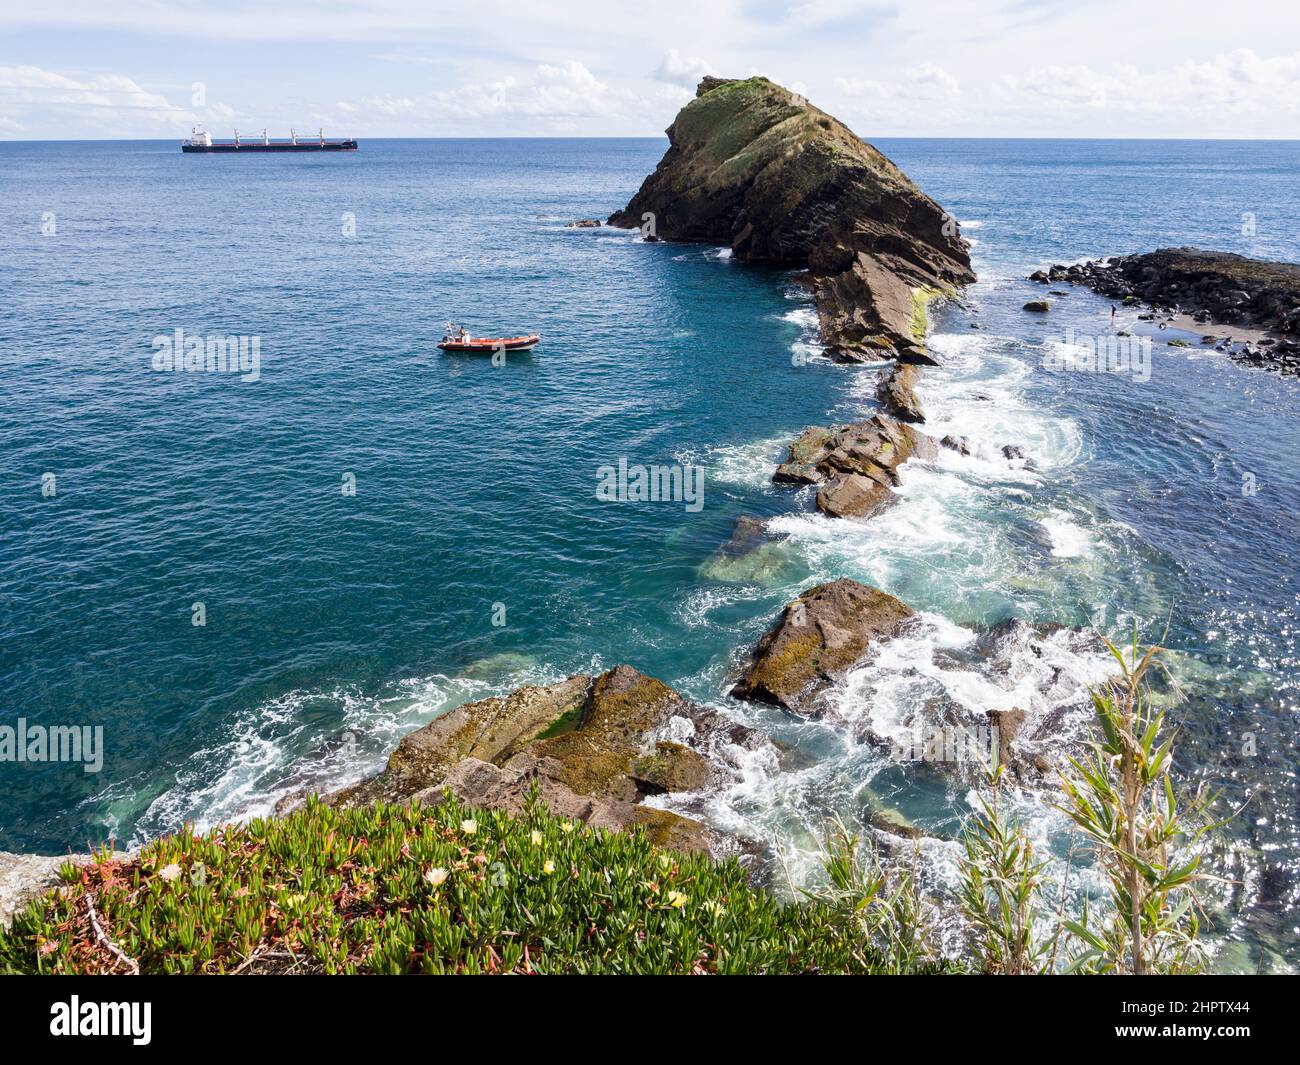 The Rock of Sao Roque: An Iconic rock juts out into the Atlantic Ocean. A small red fishing boat and a large freighter are moored near by a man wades on a nearby beach. Stock Photo